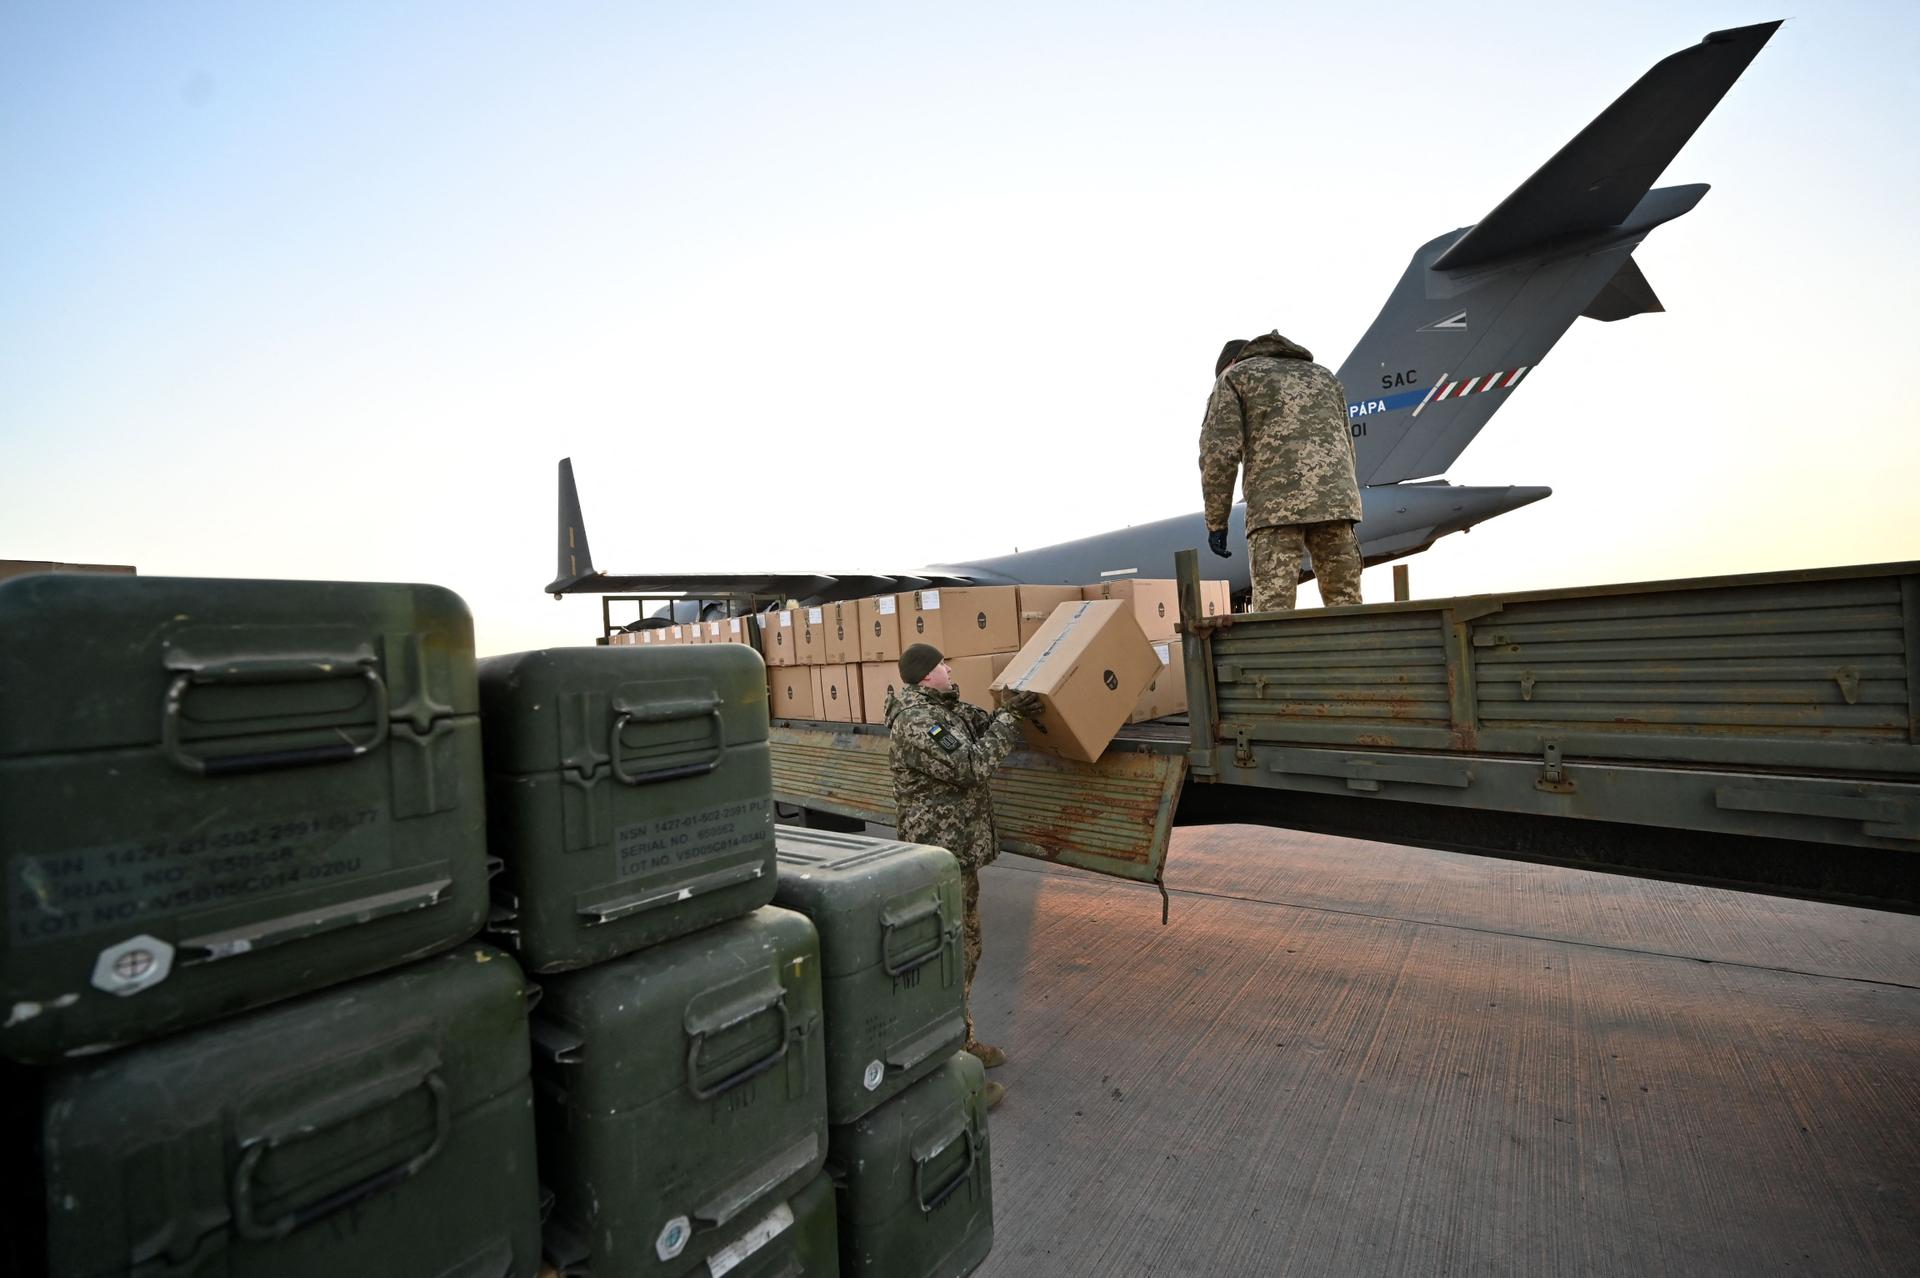 Two soldiers lifting crates onto a military truck with a cargo airplane in the background